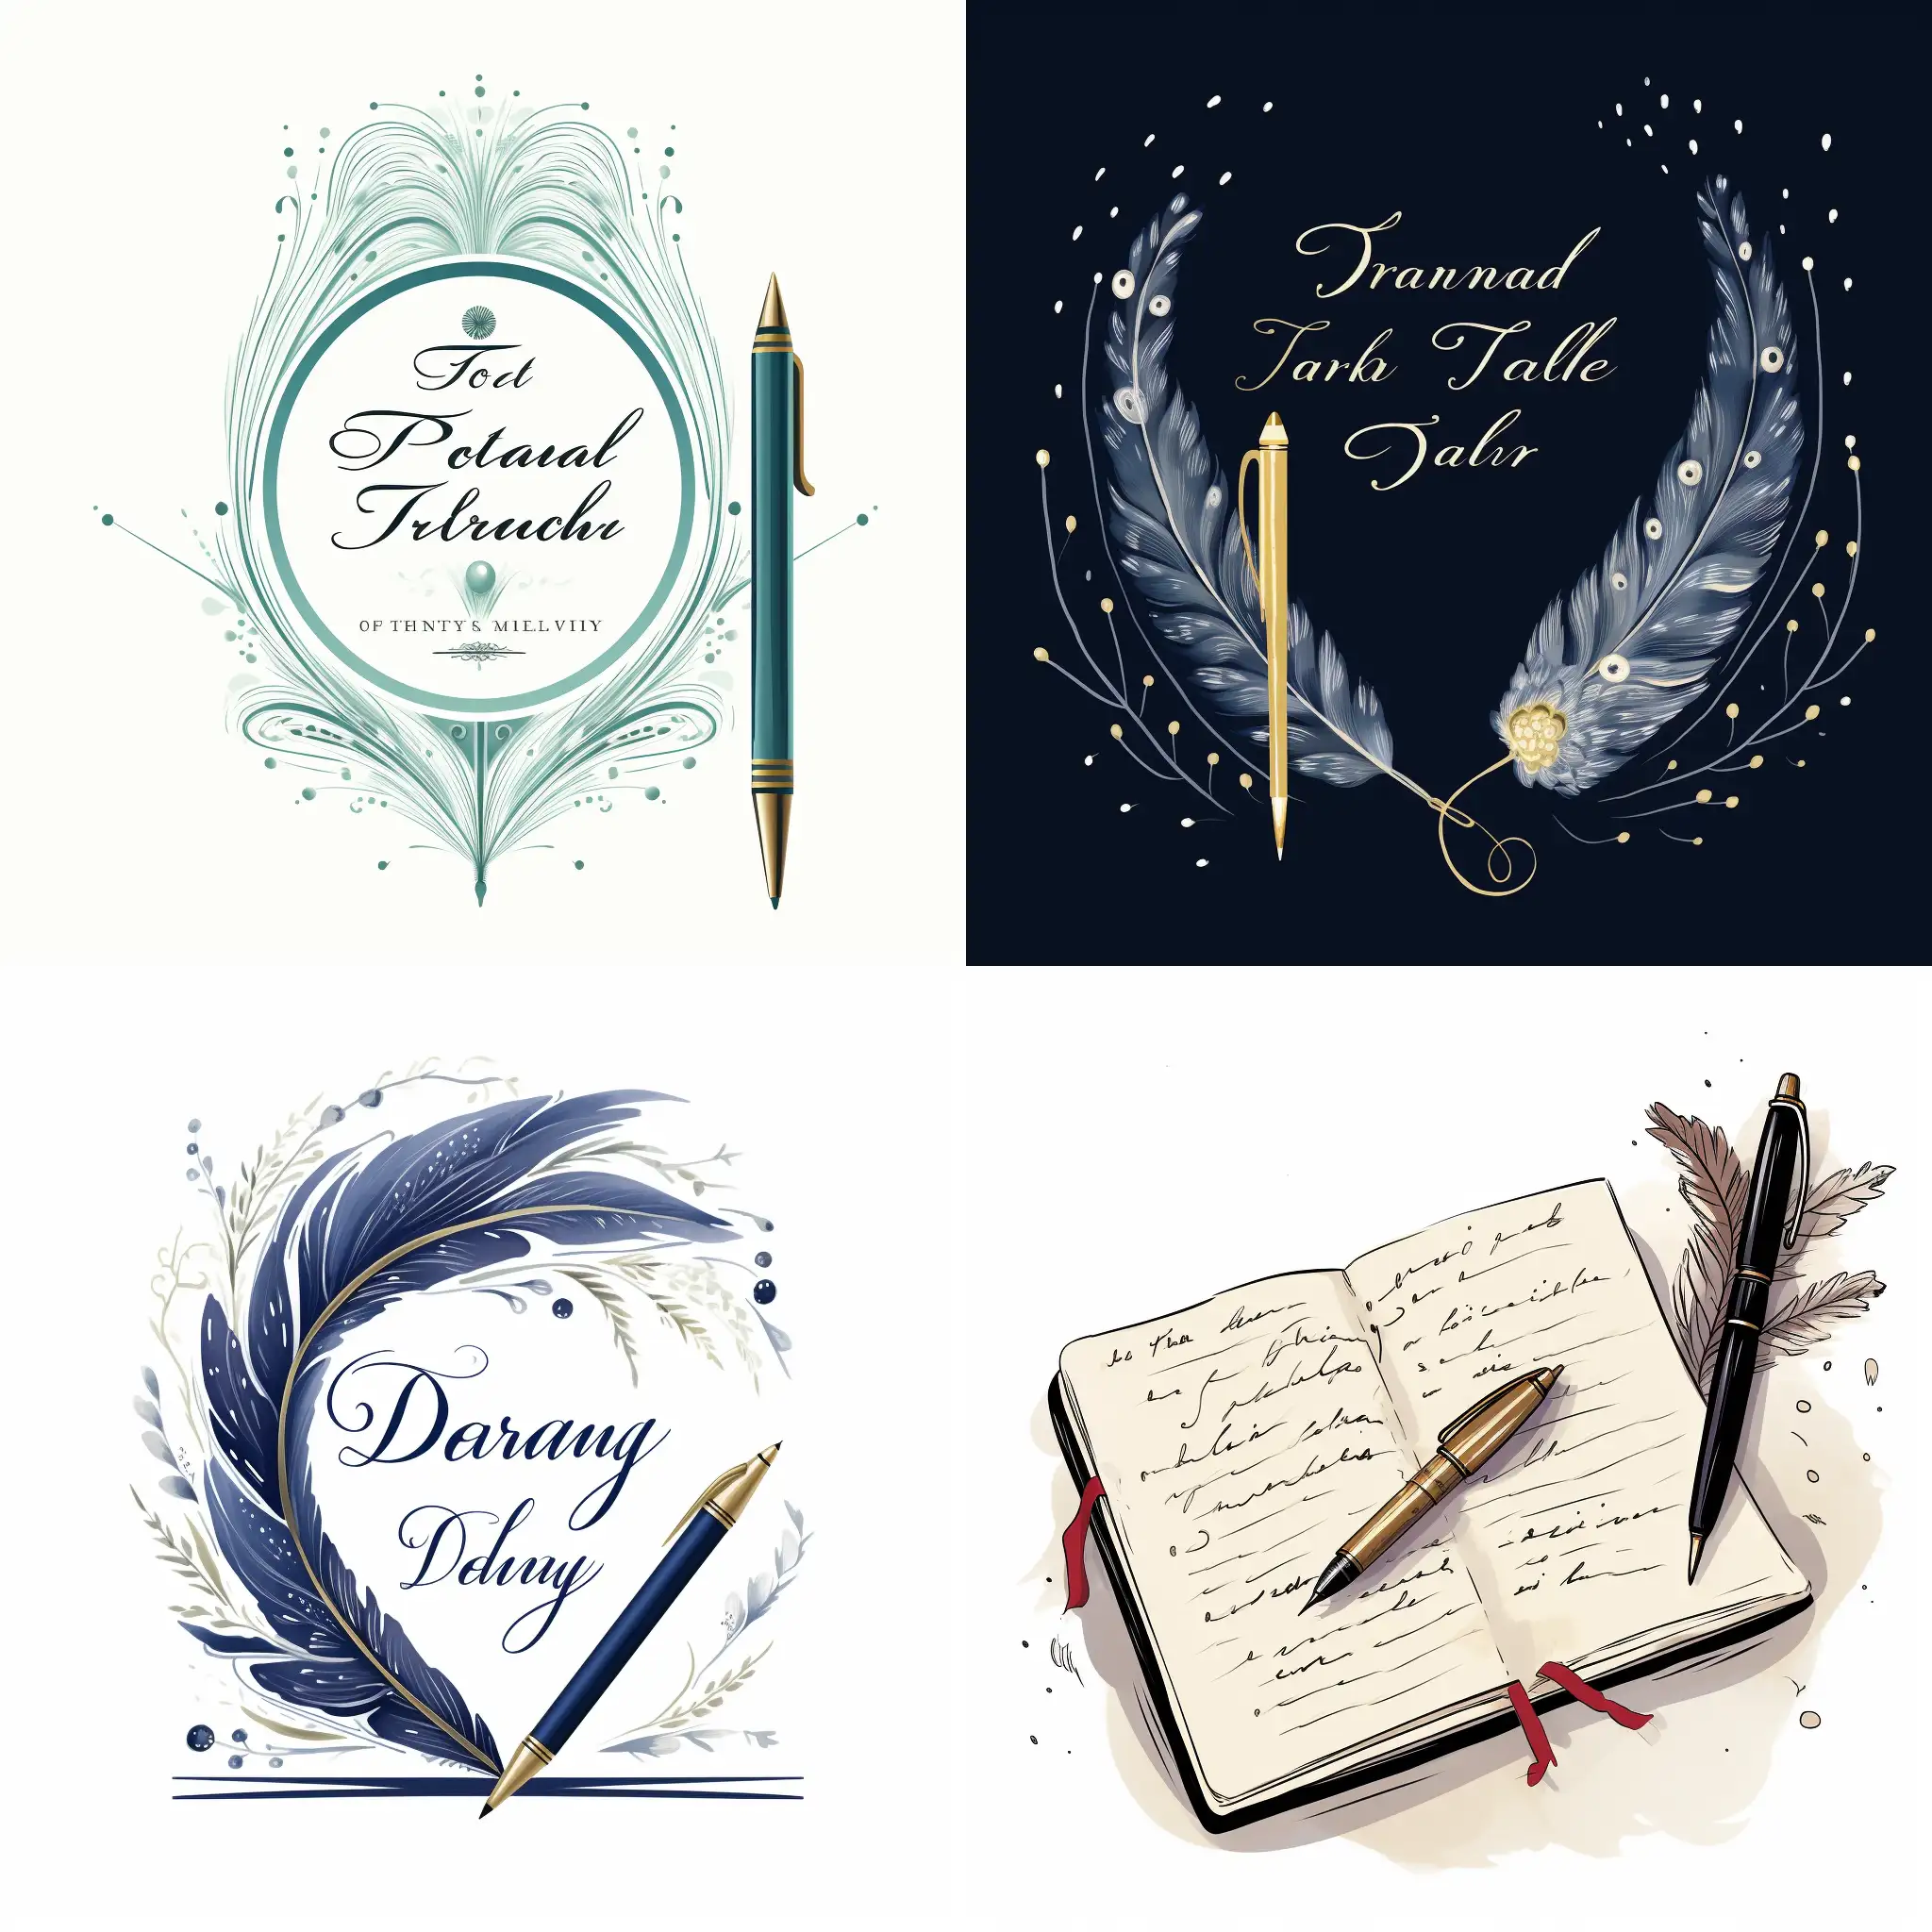 There is a pen writing a diary, logo